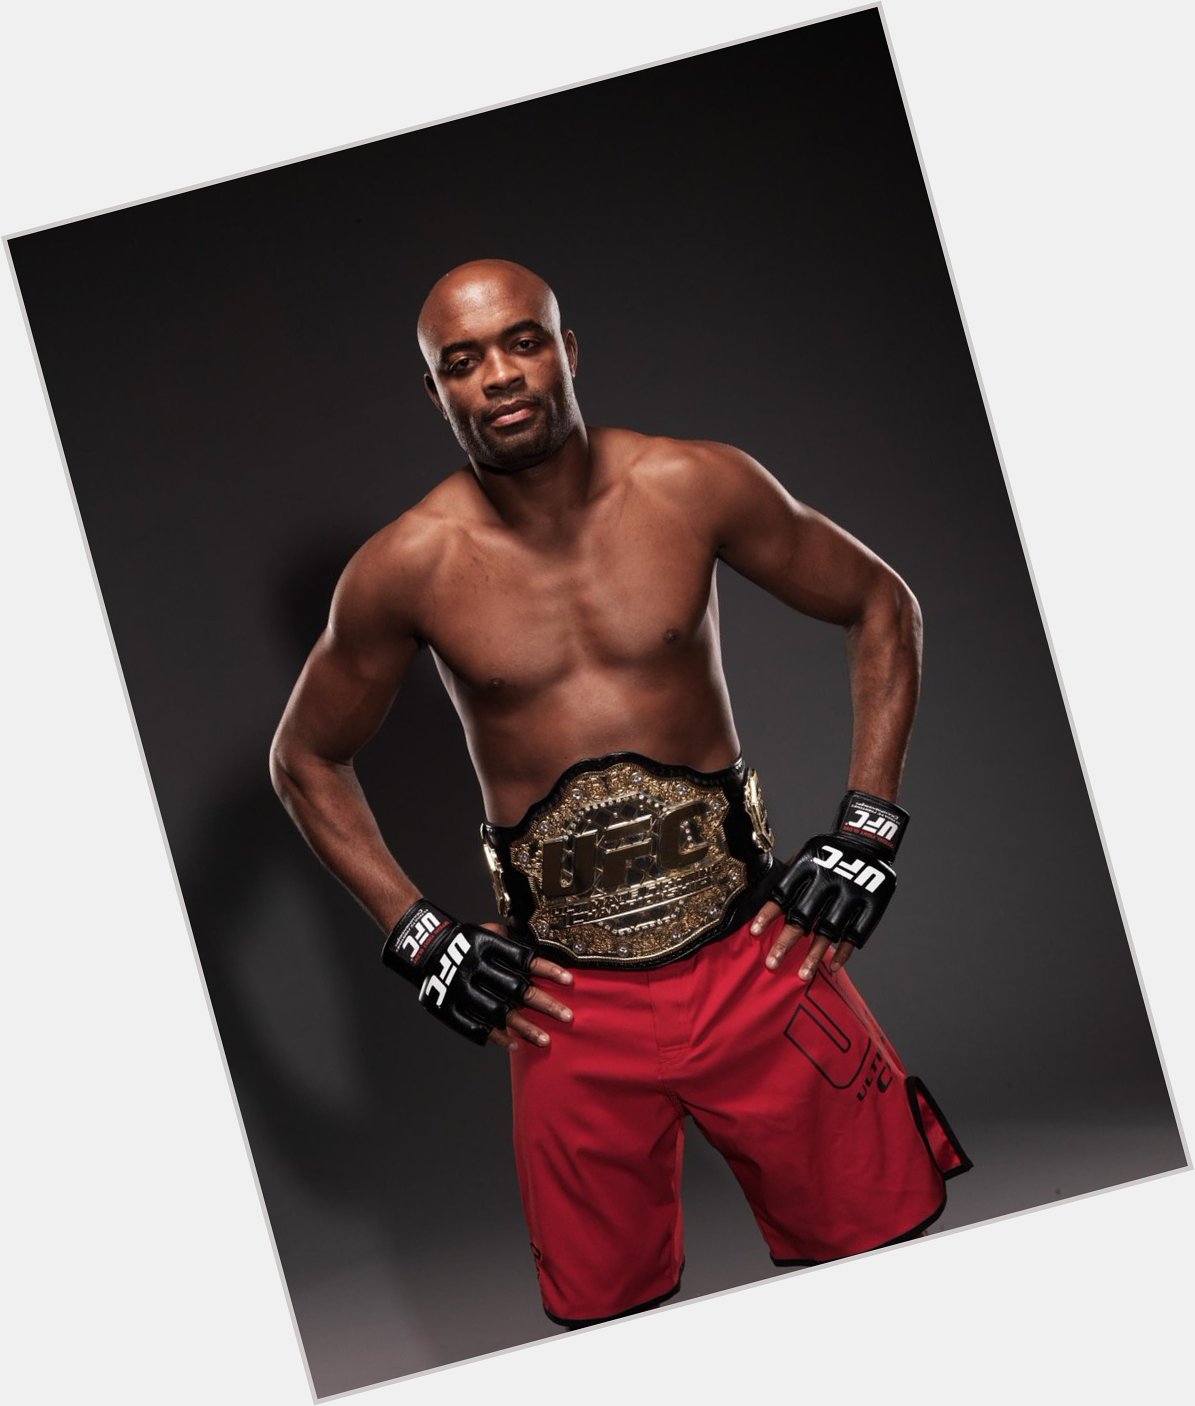 Happy Birthday to Anderson Silva, who turns 40 today! 